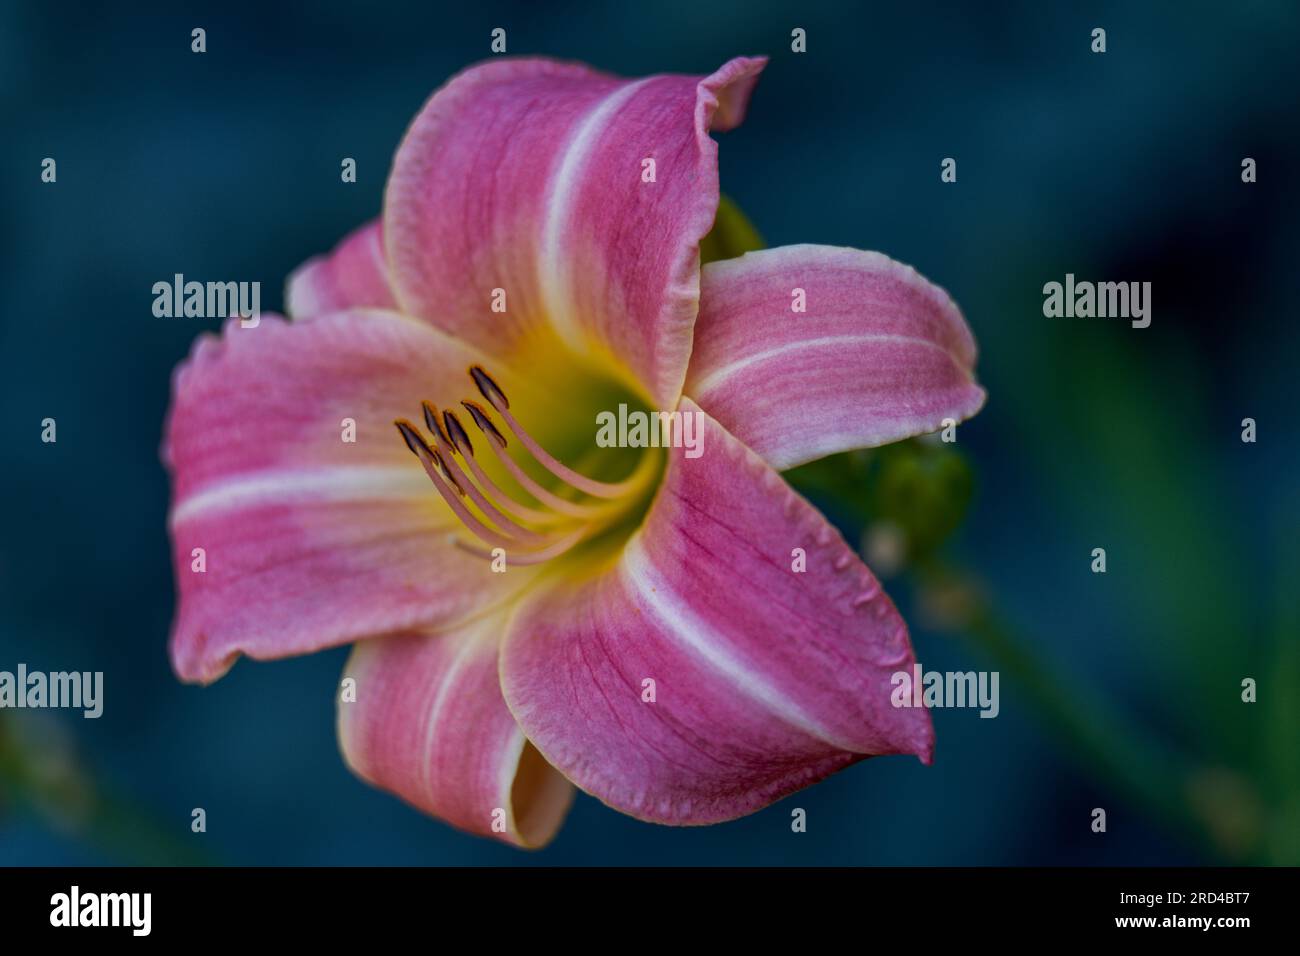 Lush,colorful vivid purple pink day lily flower close up Stock Photo